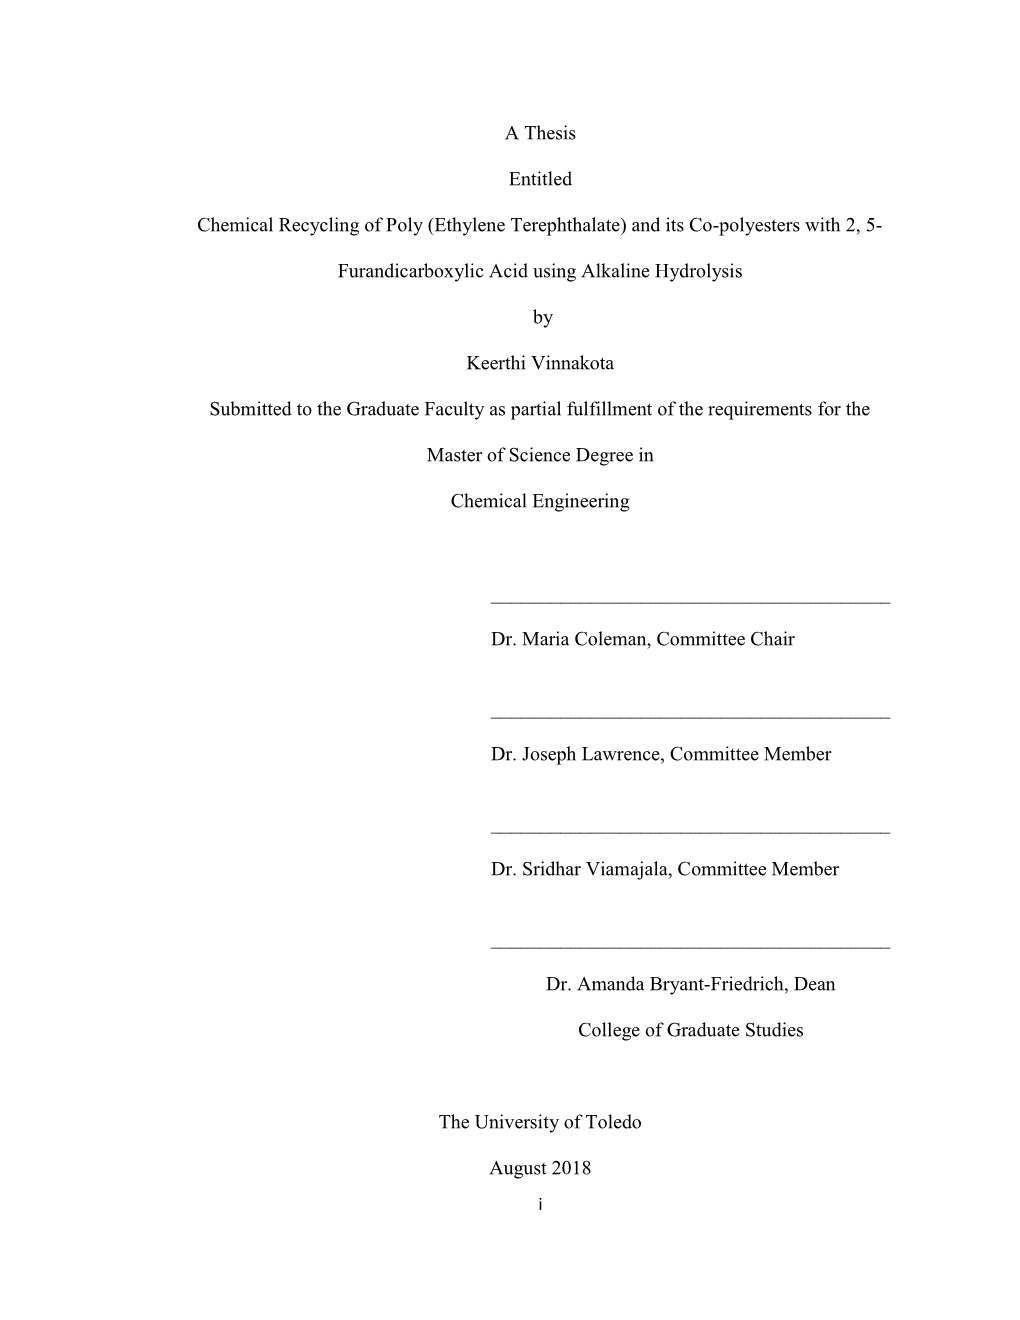 A Thesis Entitled Chemical Recycling of Poly (Ethylene Terephthalate)